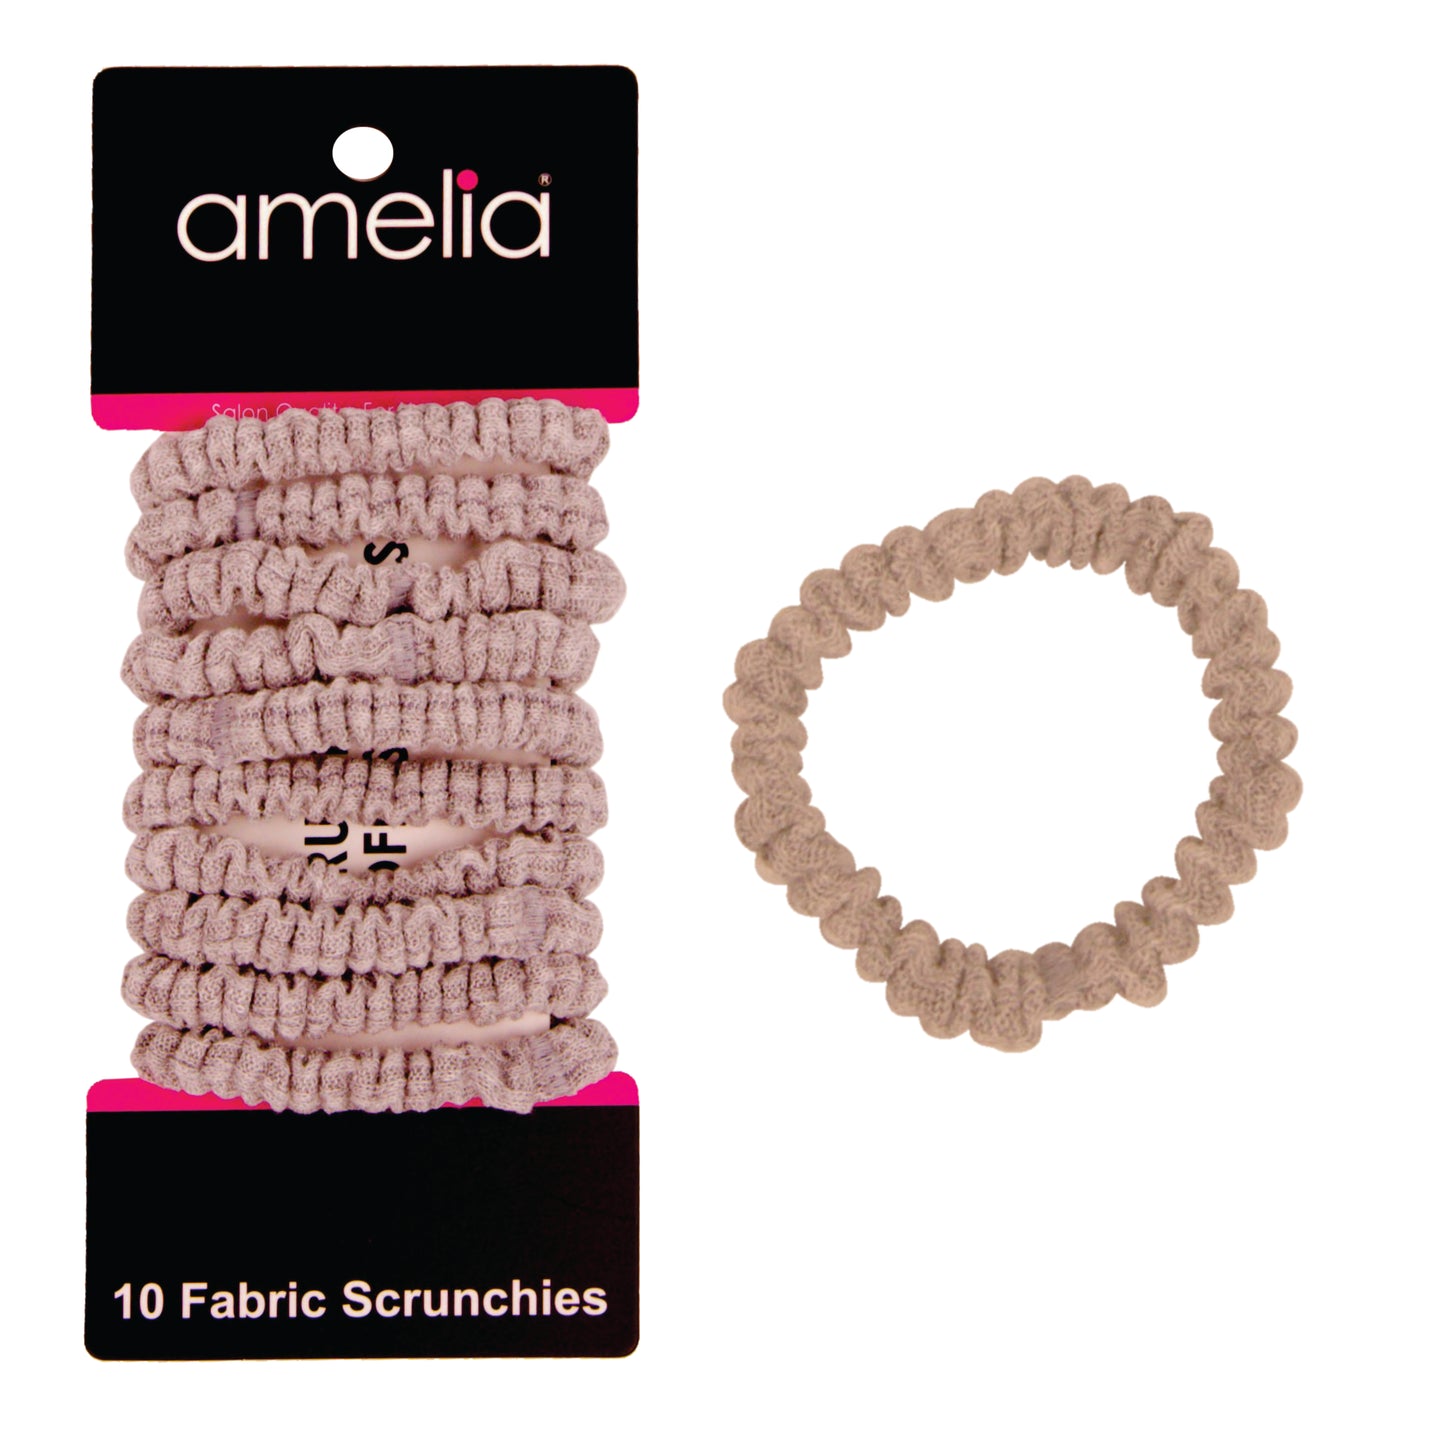 Amelia Beauty, Grey Ribbed Scrunchies, 2.25in Diameter, Gentle on Hair, Strong Hold, No Snag, No Dents or Creases. 10 Pack